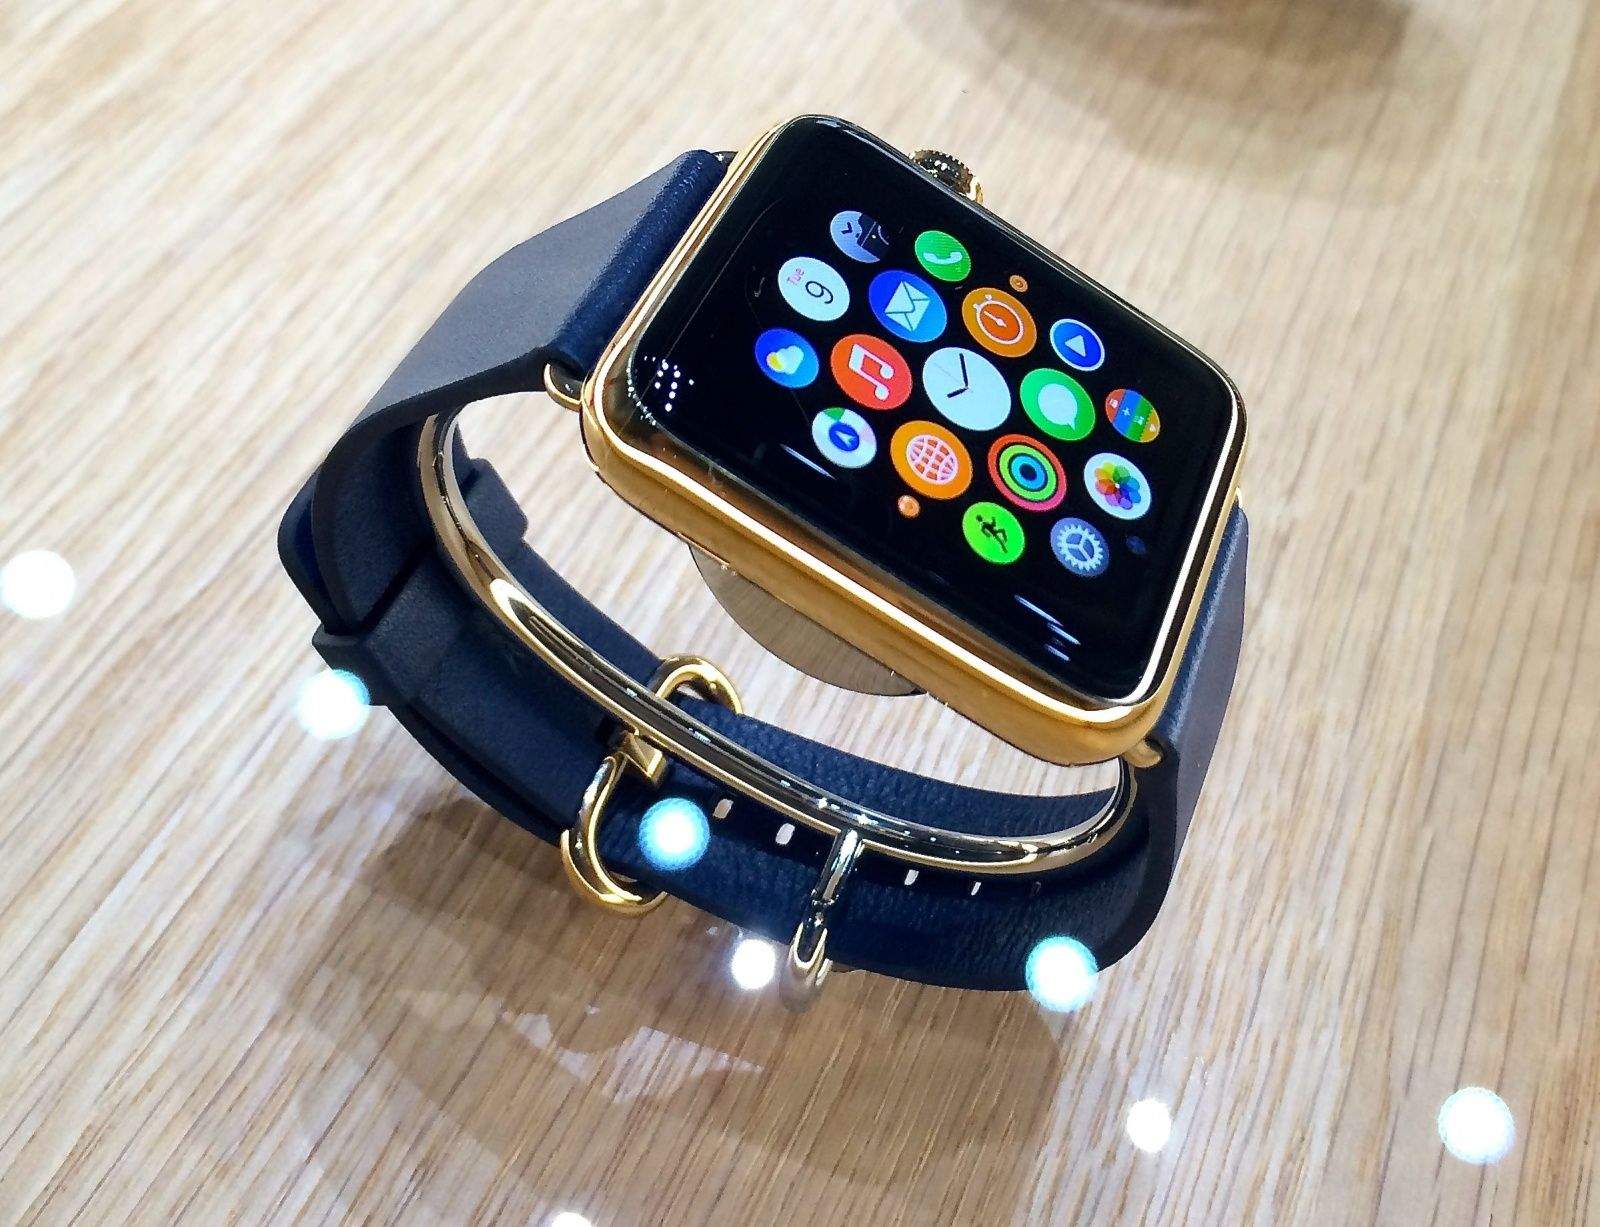 Apple Watch supply is finally catching up with demand.